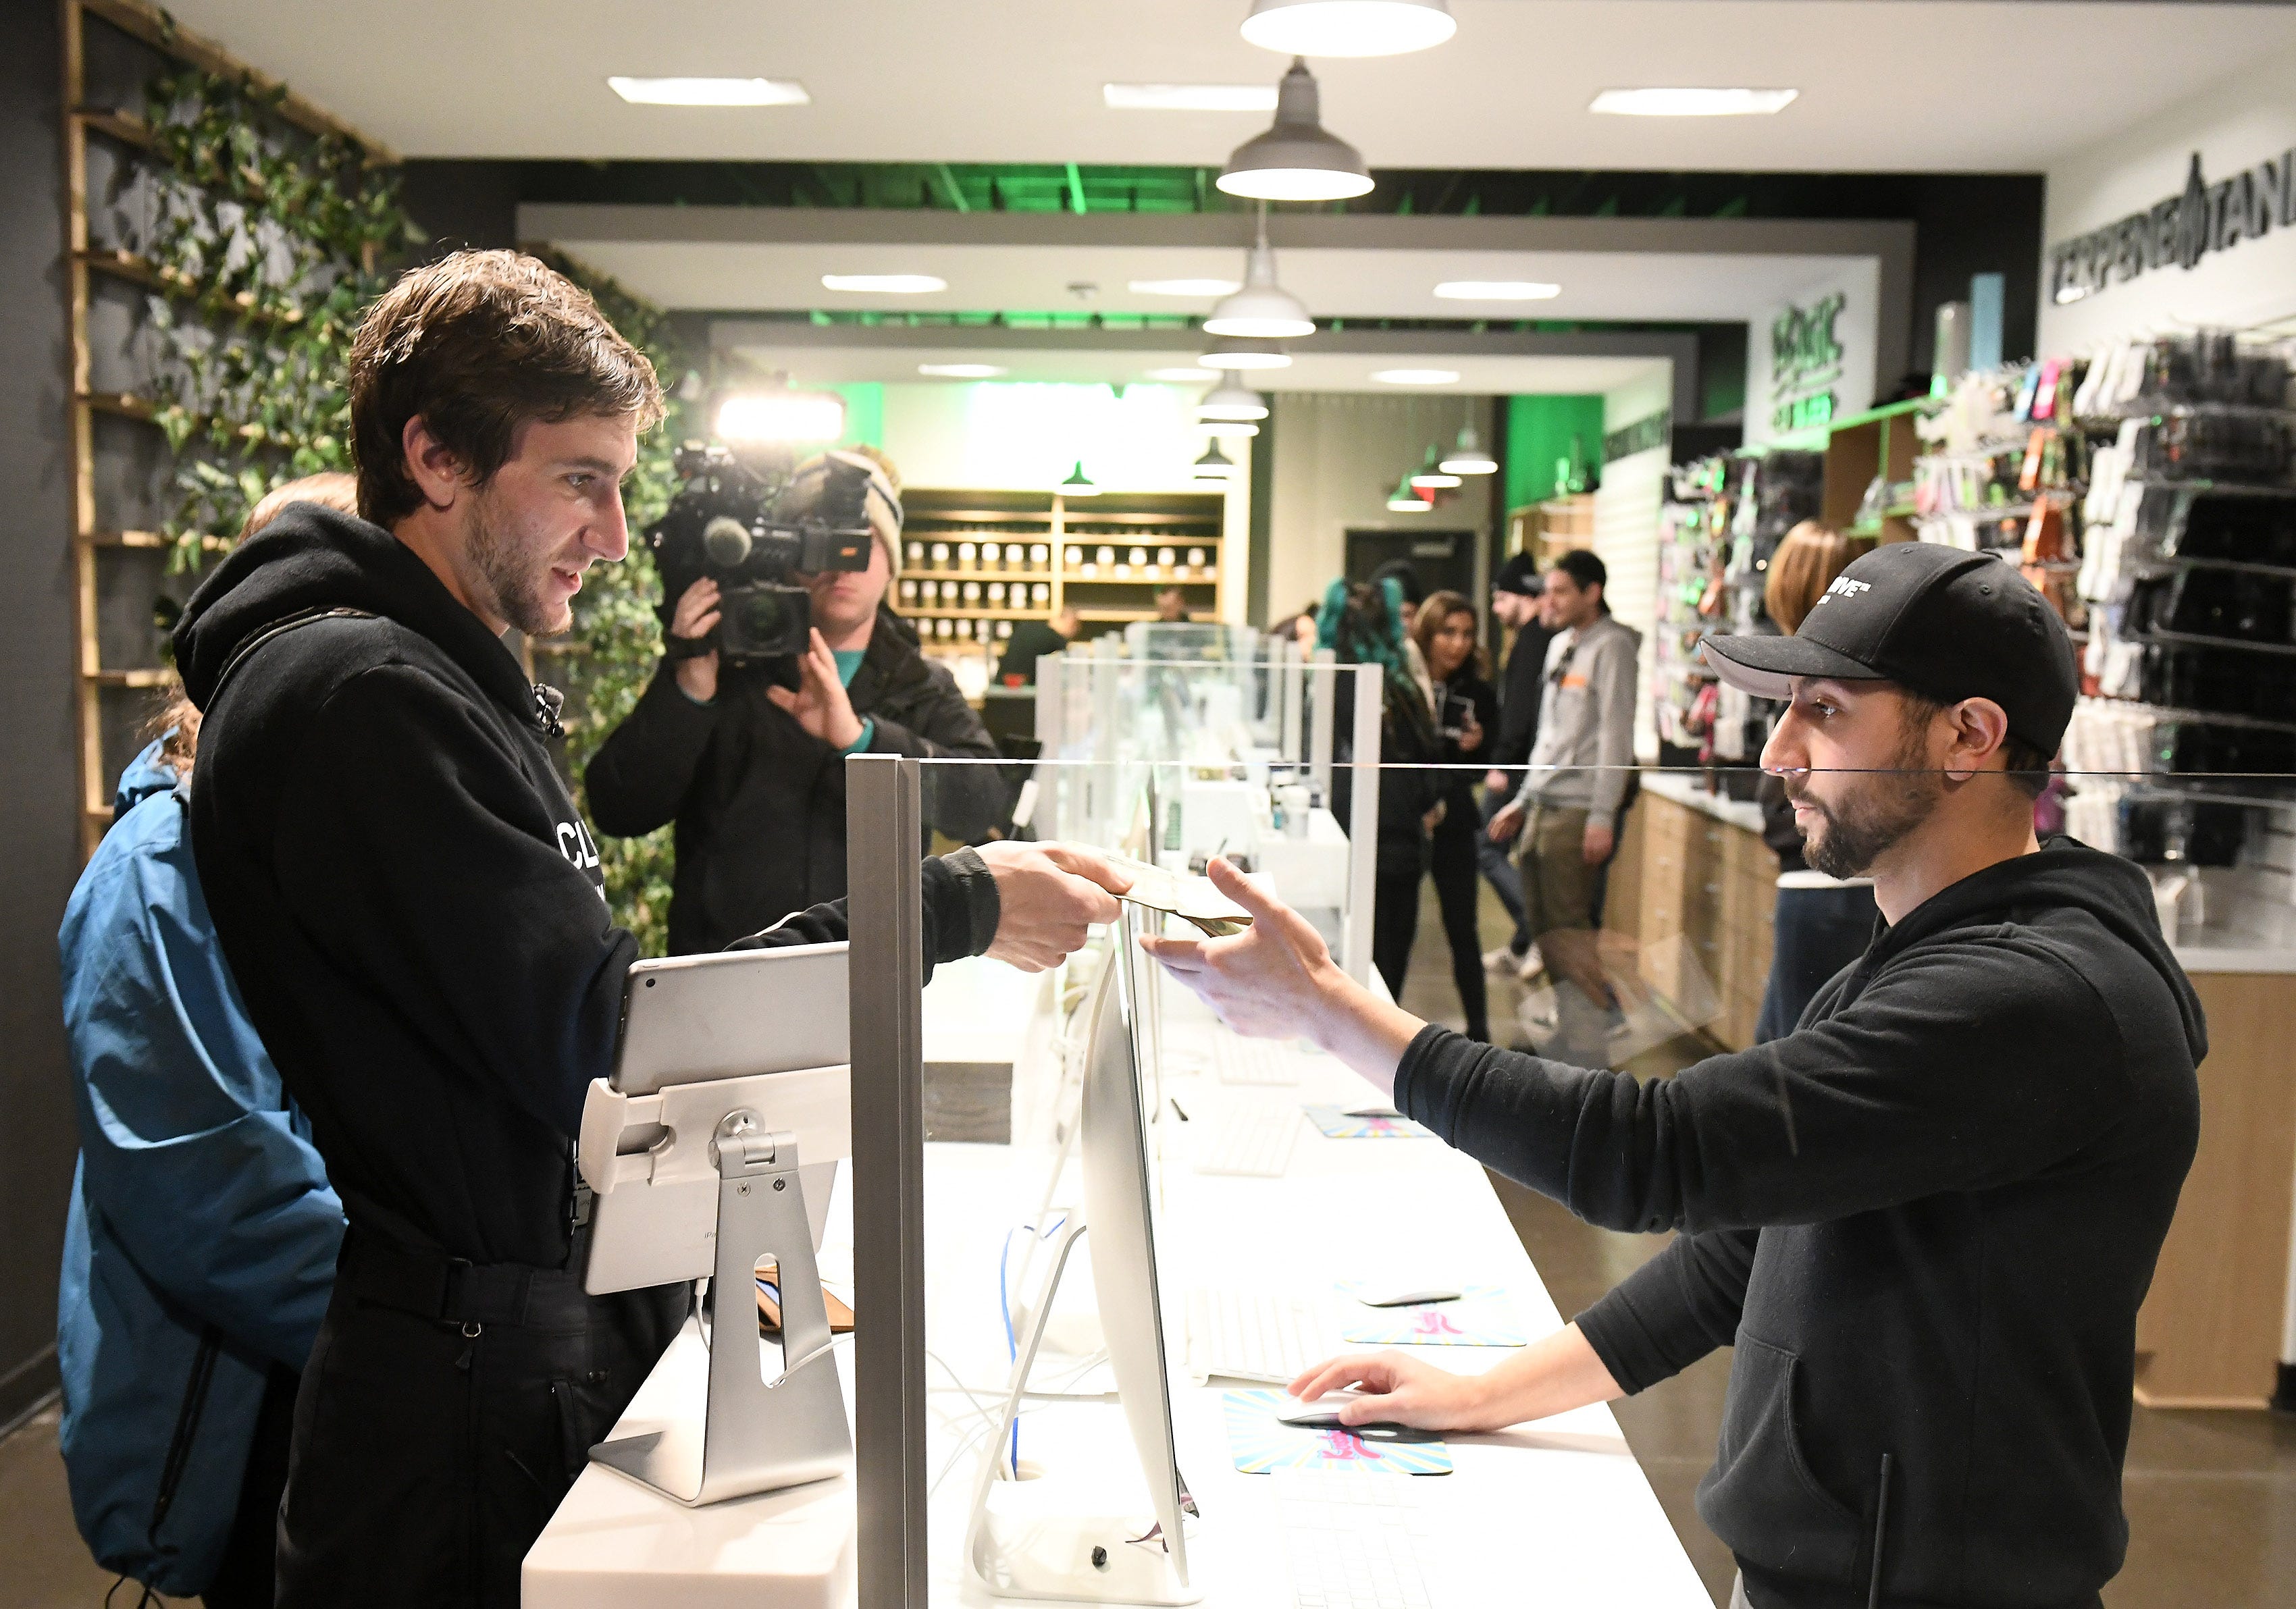 Kelly Savage, 25, of Ohio, left, makes the first purchase of recreational marijuana giving cash to general manager Nick Warra, right, at Exclusive Provisioning Center in Ann Arbor, Mich. on Dec. 1, 2019.  Savage has Type 1 diabetes and also uses marijuana socially.
(Robin Buckson / The Detroit News)